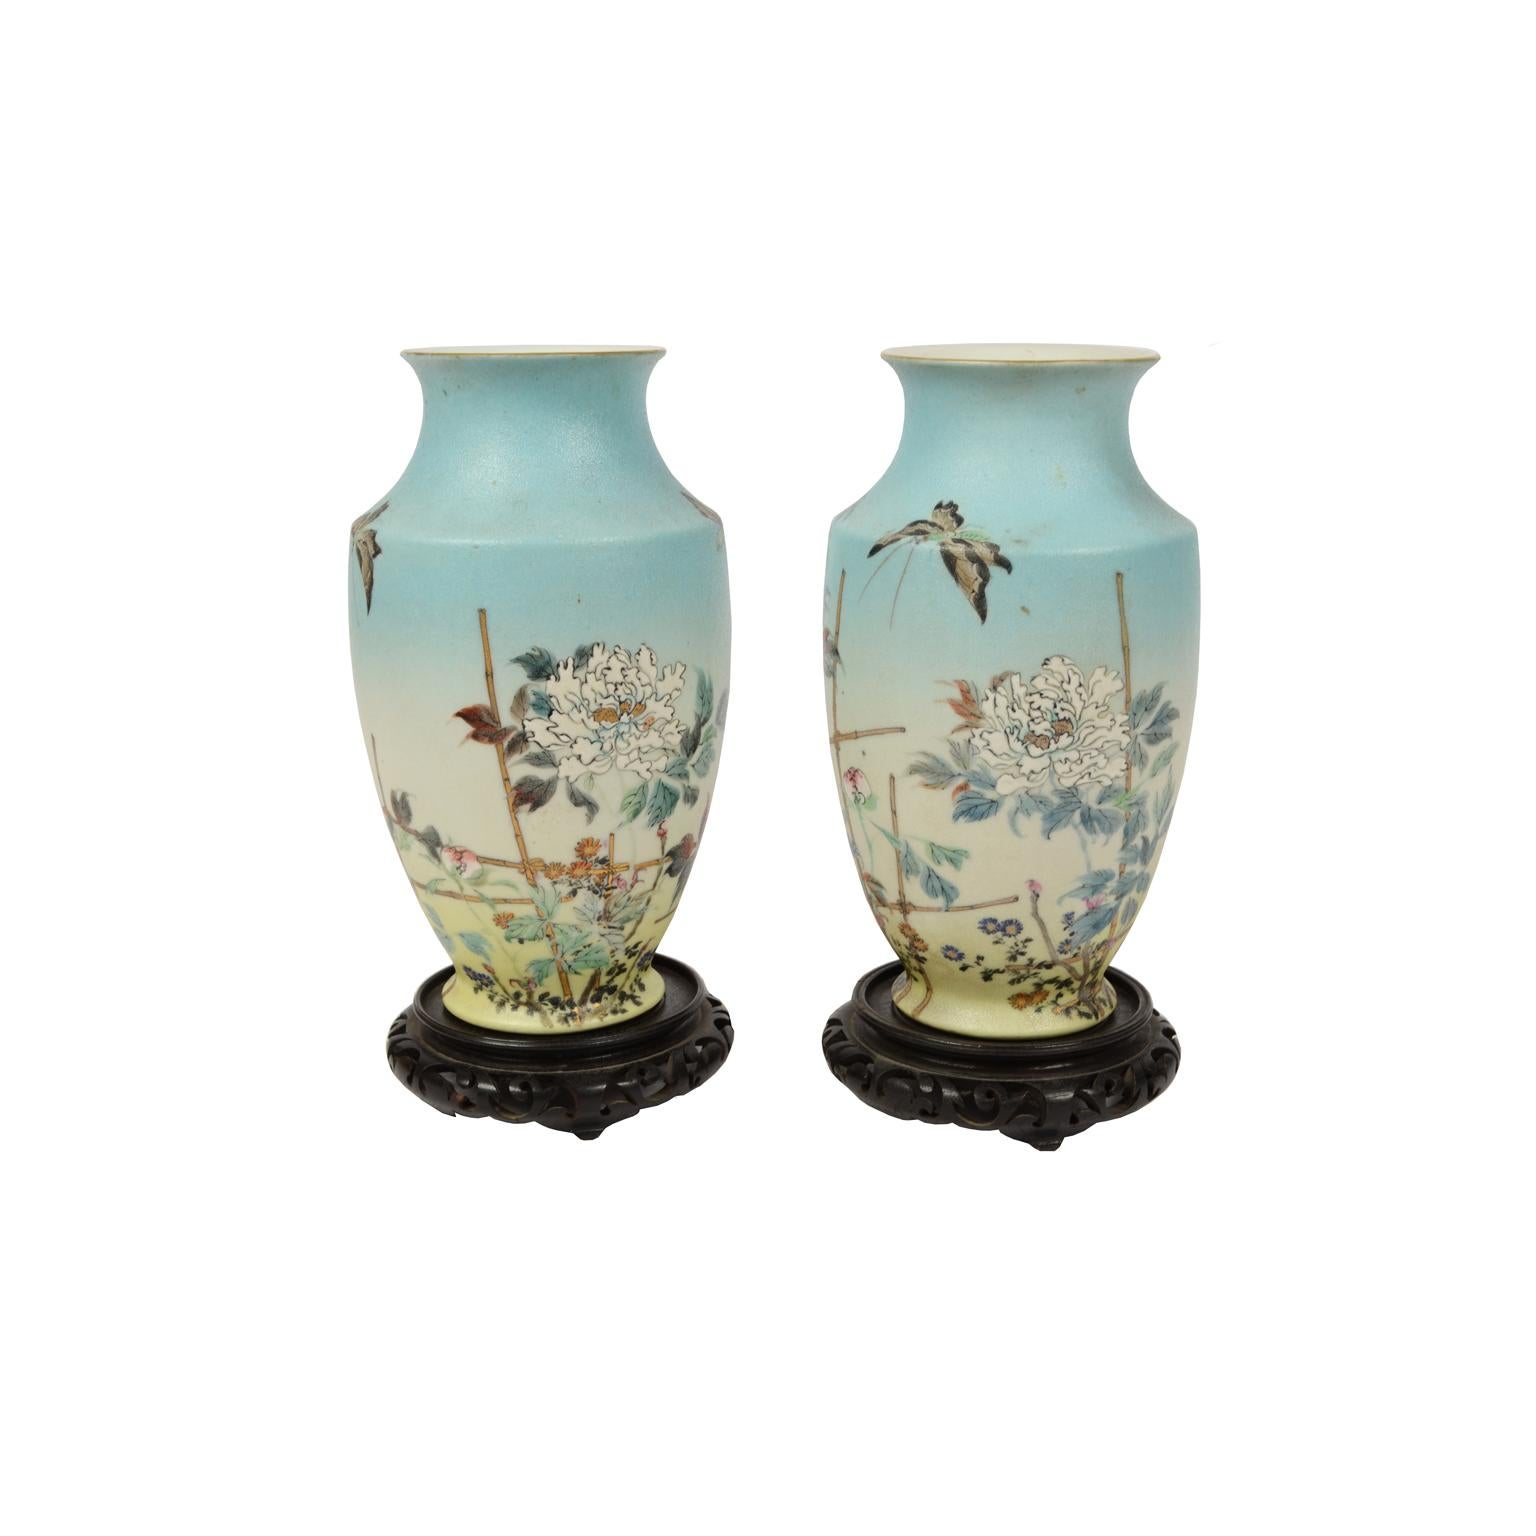 Pair of vases made of polychrome porcelain depicting hand-decorated flowers and butterflies, complete with base of carved wood. Japanese manufacture, early 1900s, signed on the base. 
Good condition. Measures: Height 24.6 cm, base diameter 8.5 cm.
